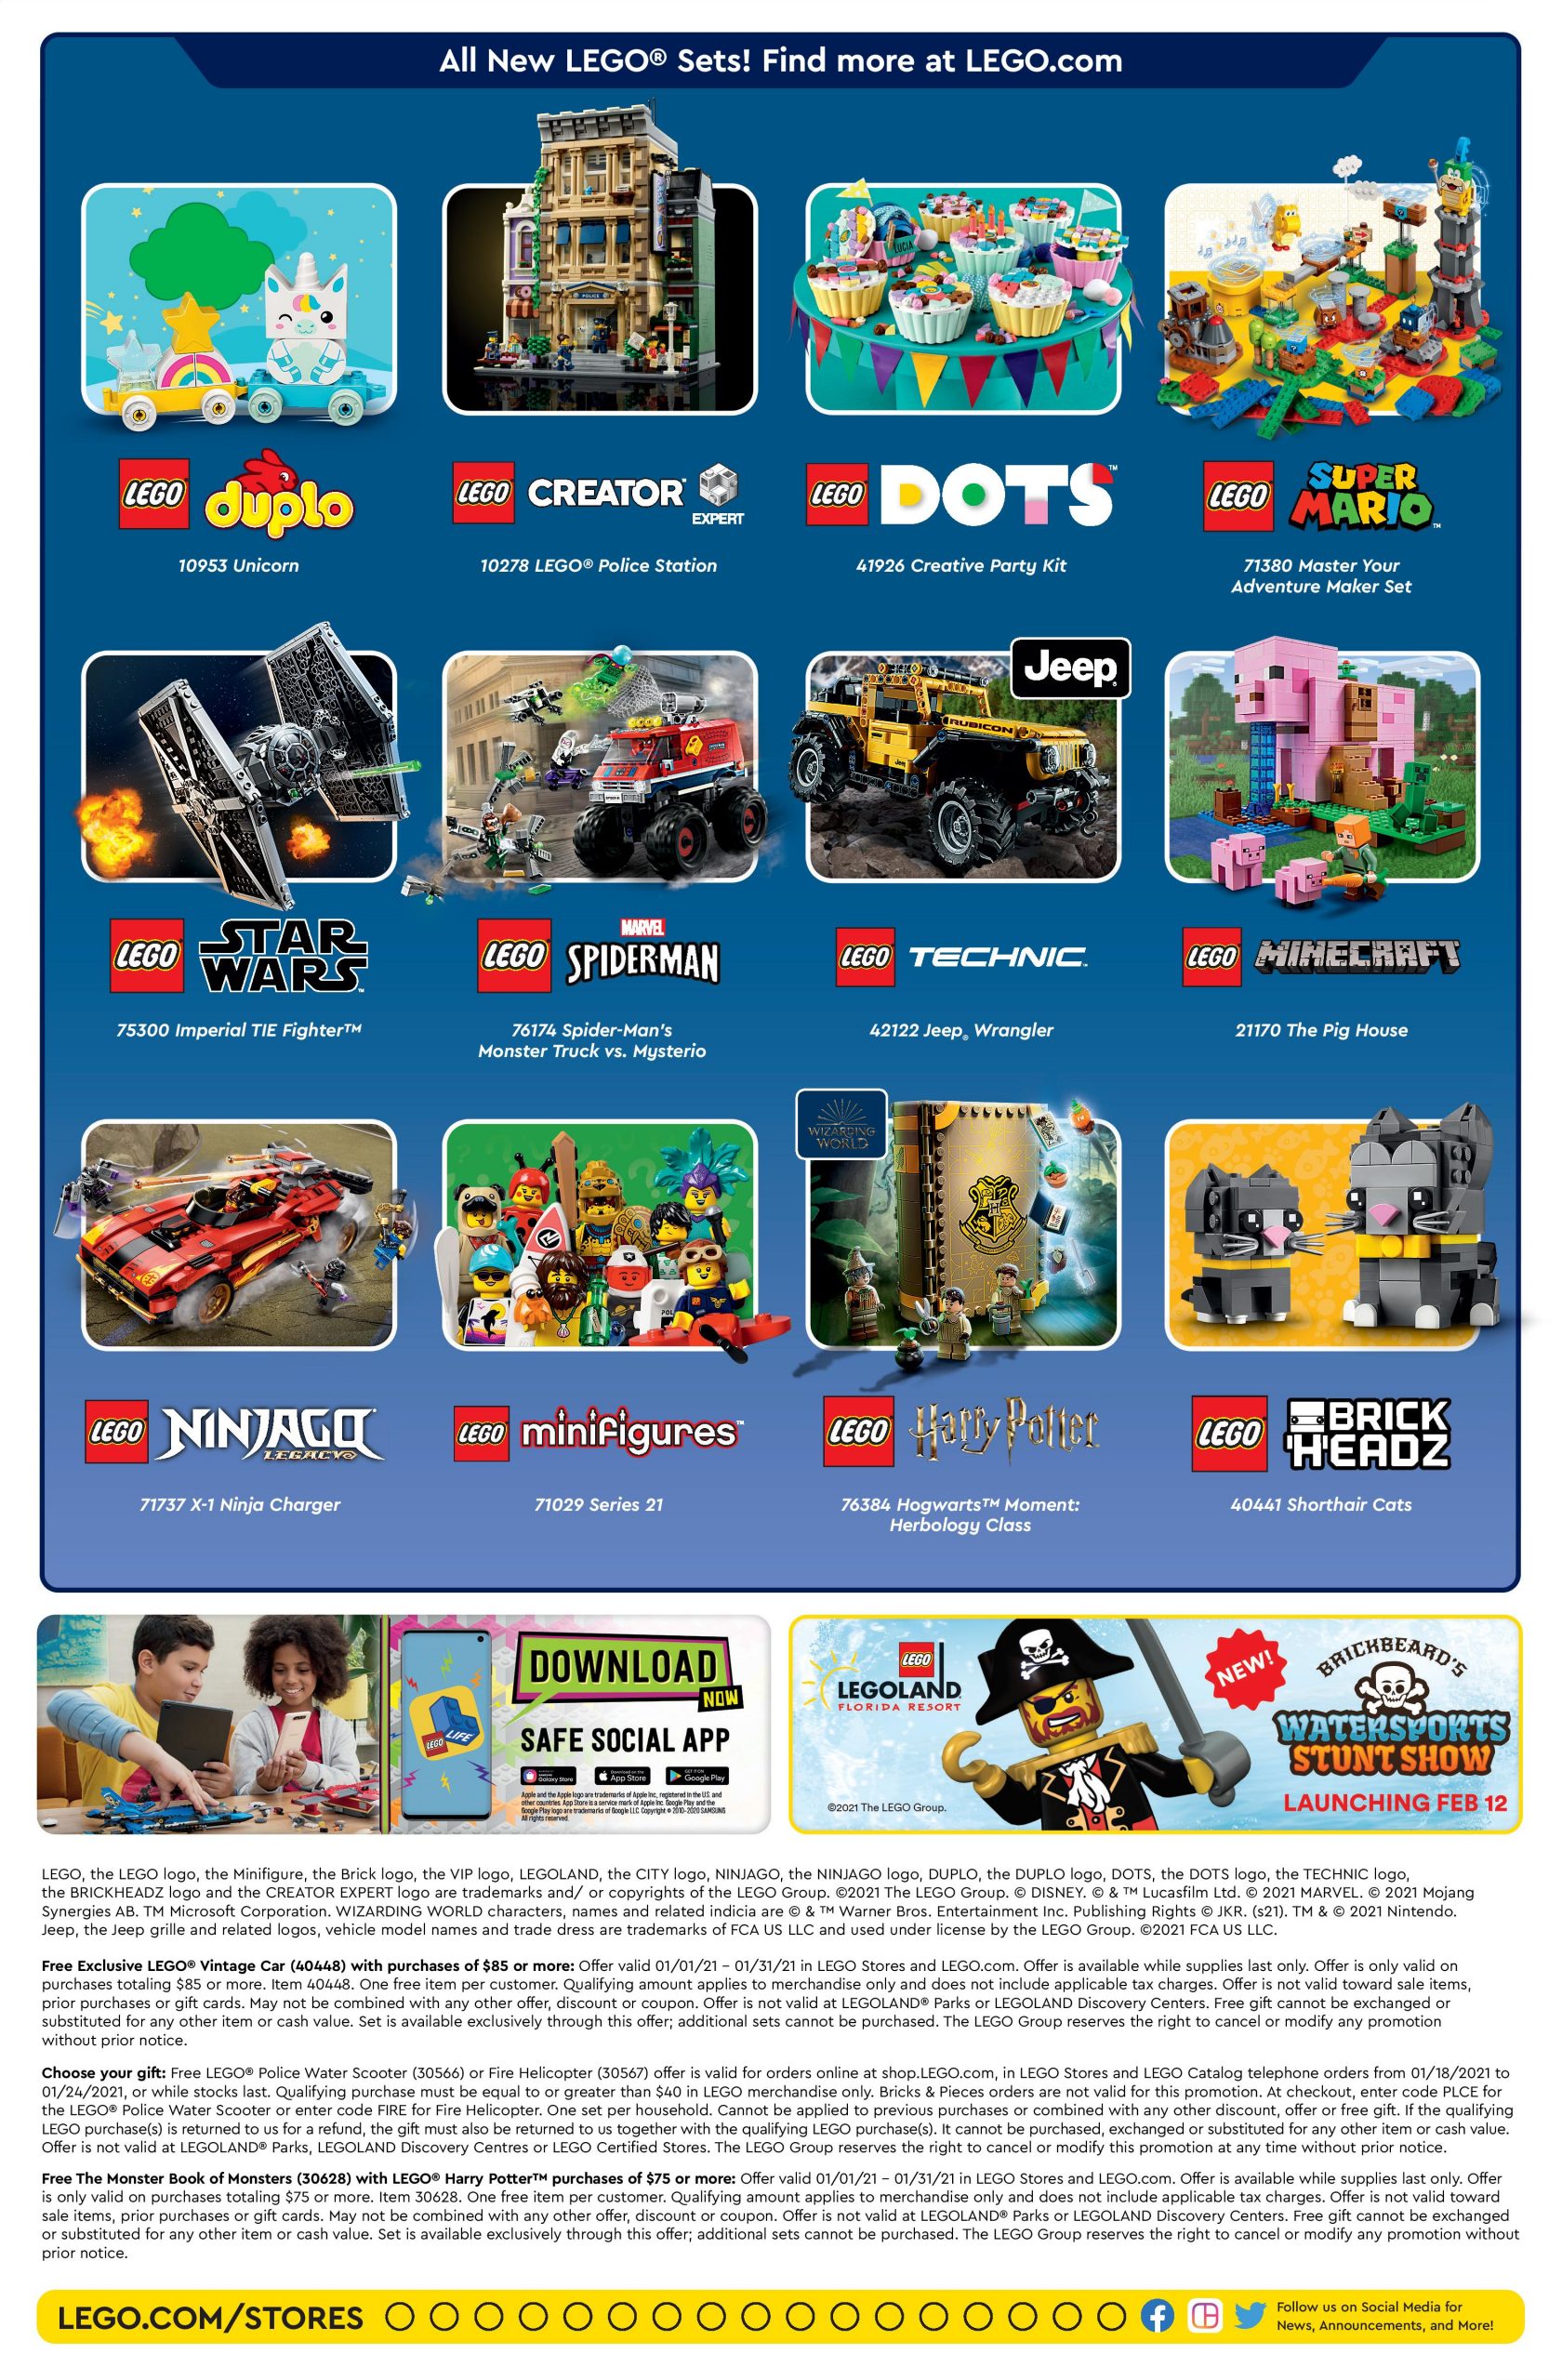 LEGO January 2021 Store Calendar Promotions & Events - The Brick Fan